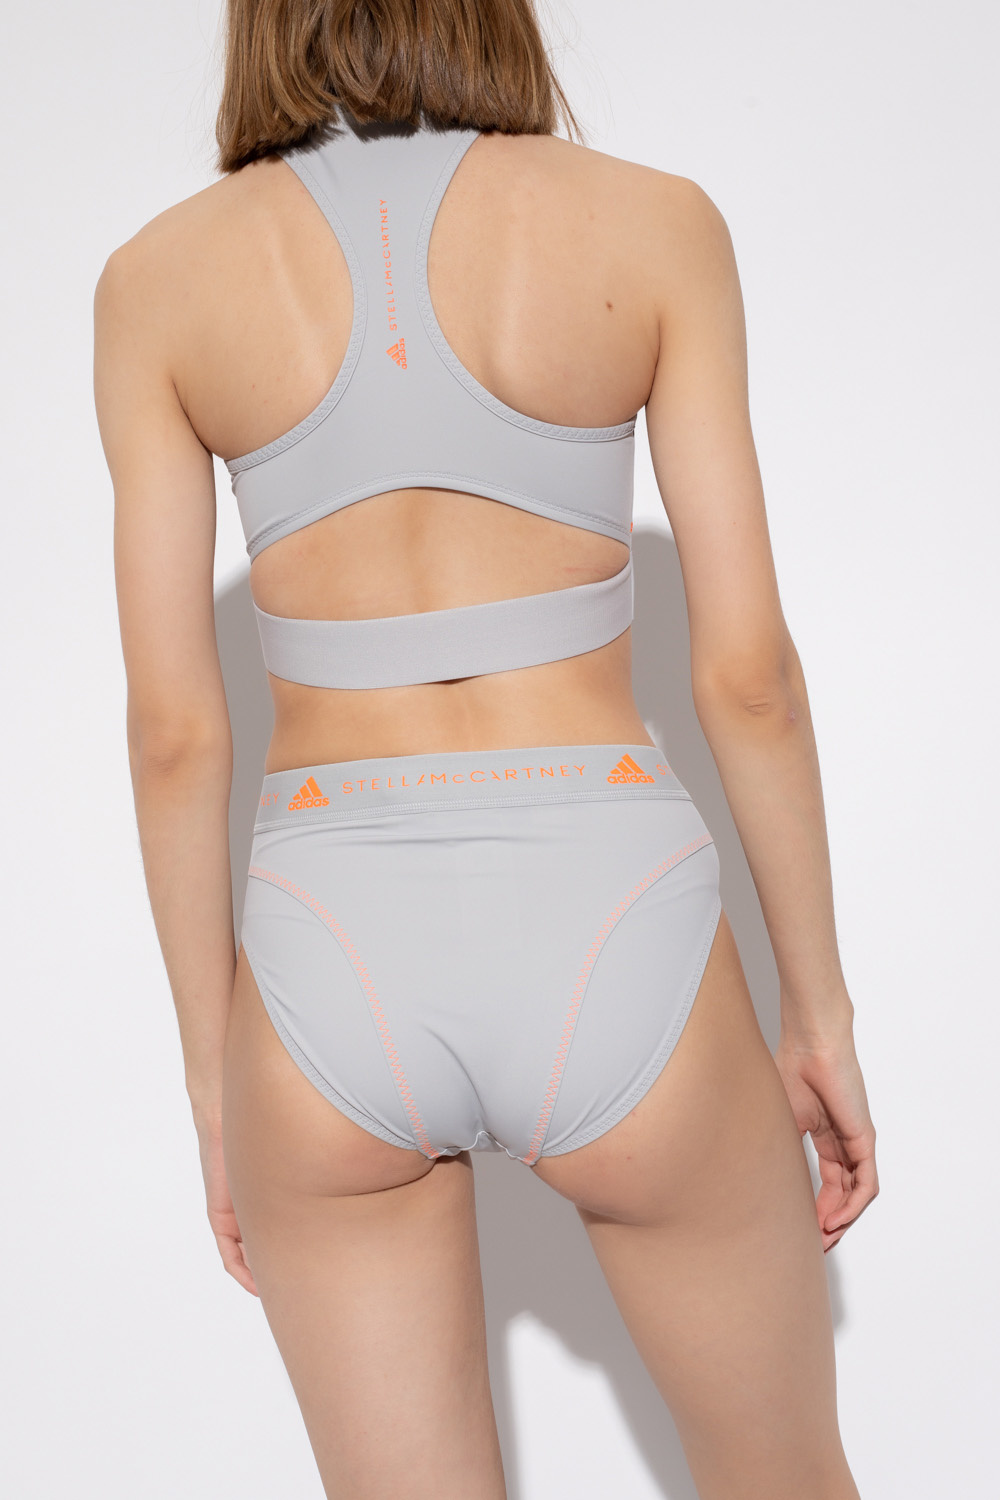 adidas cher by Stella McCartney Swimsuit top